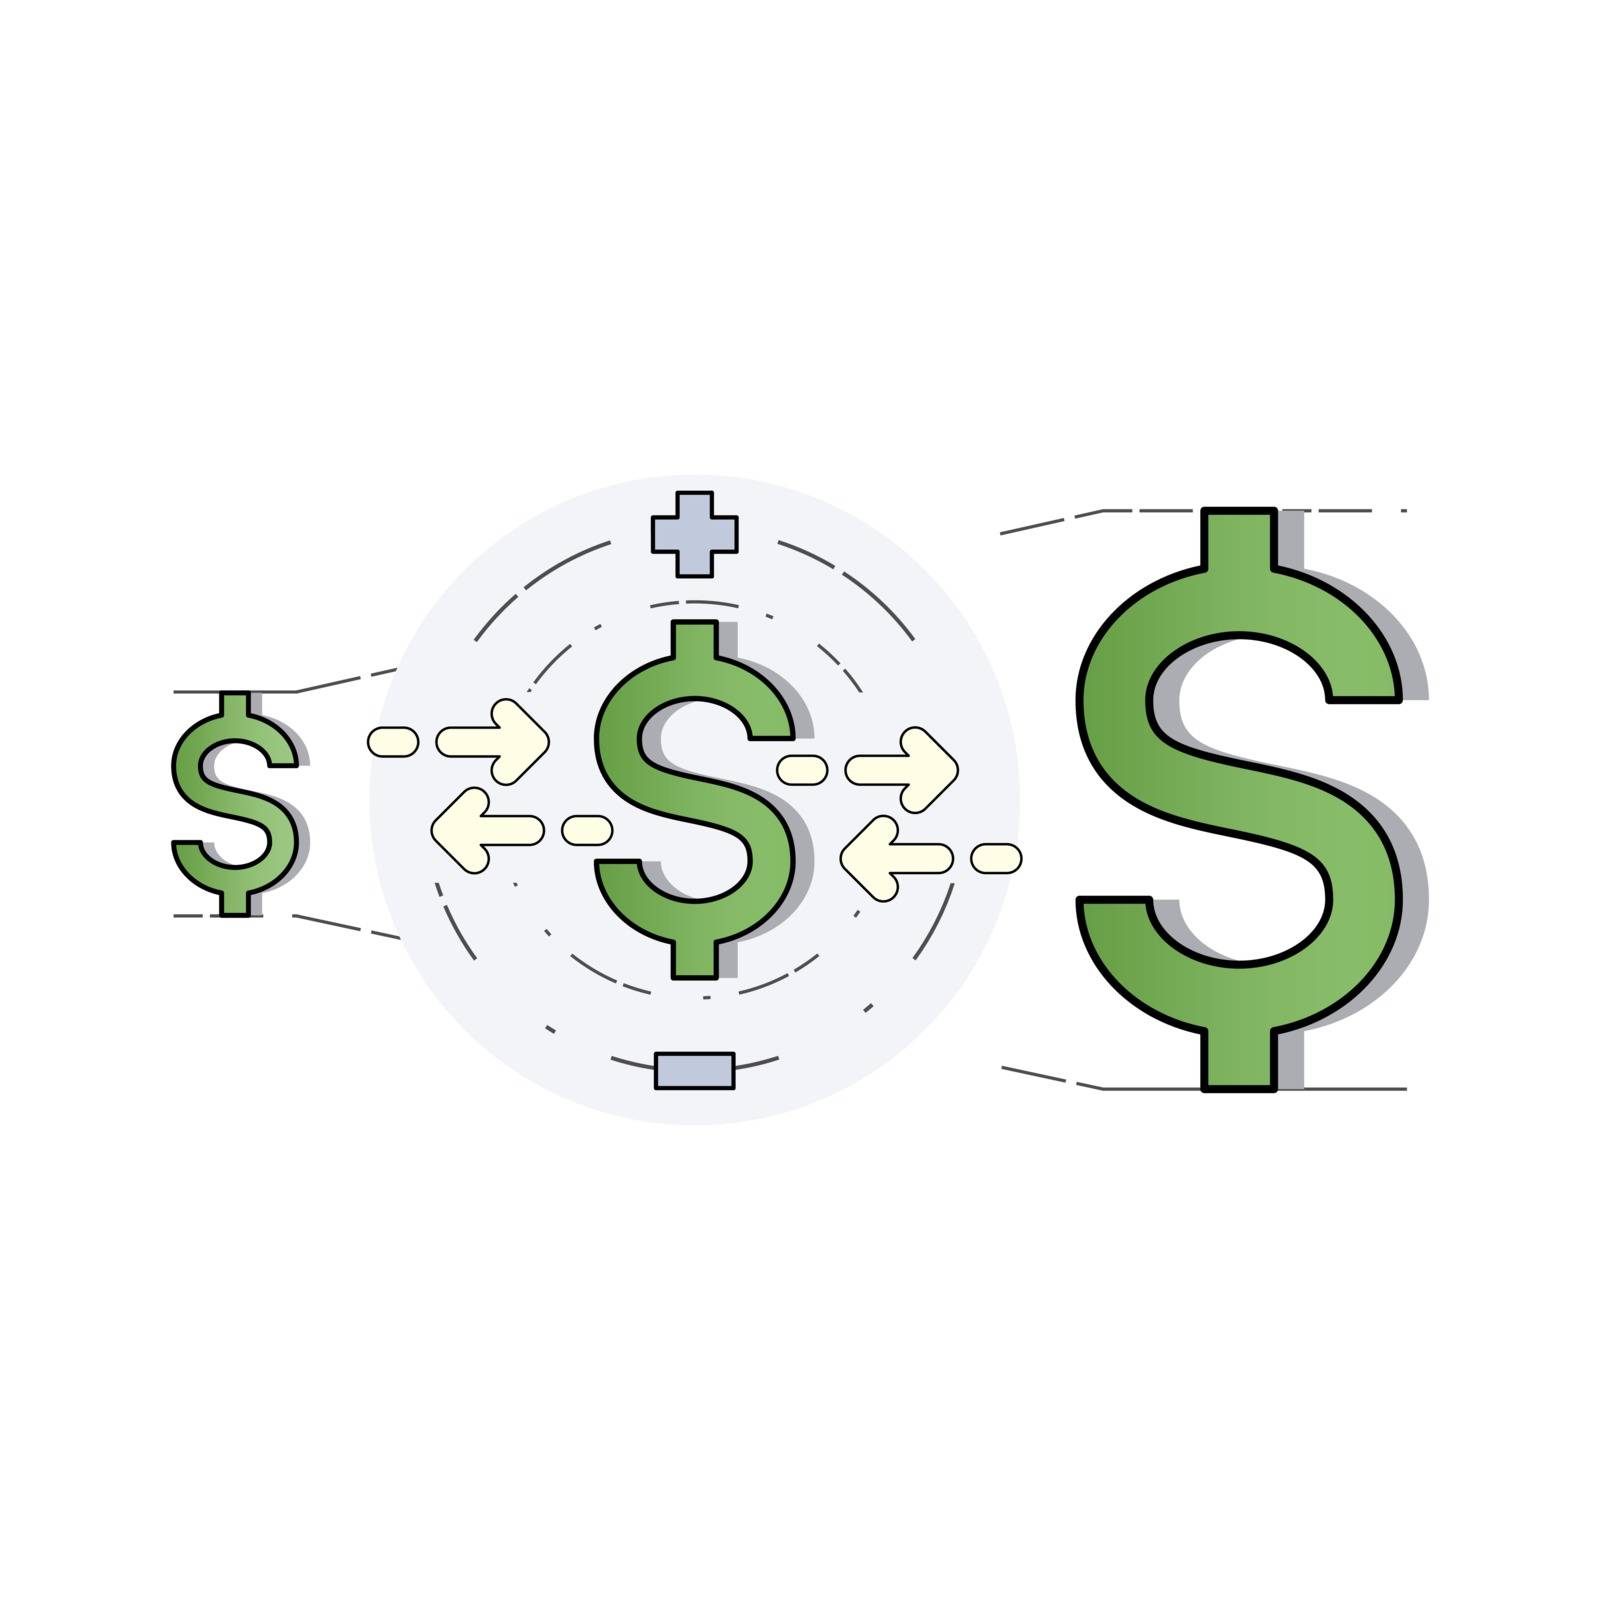 Dollar signs arrange in order of size from smallest to largest representing the value of money. Currency rate, exchange rate. Vector illustration outline flat design style.